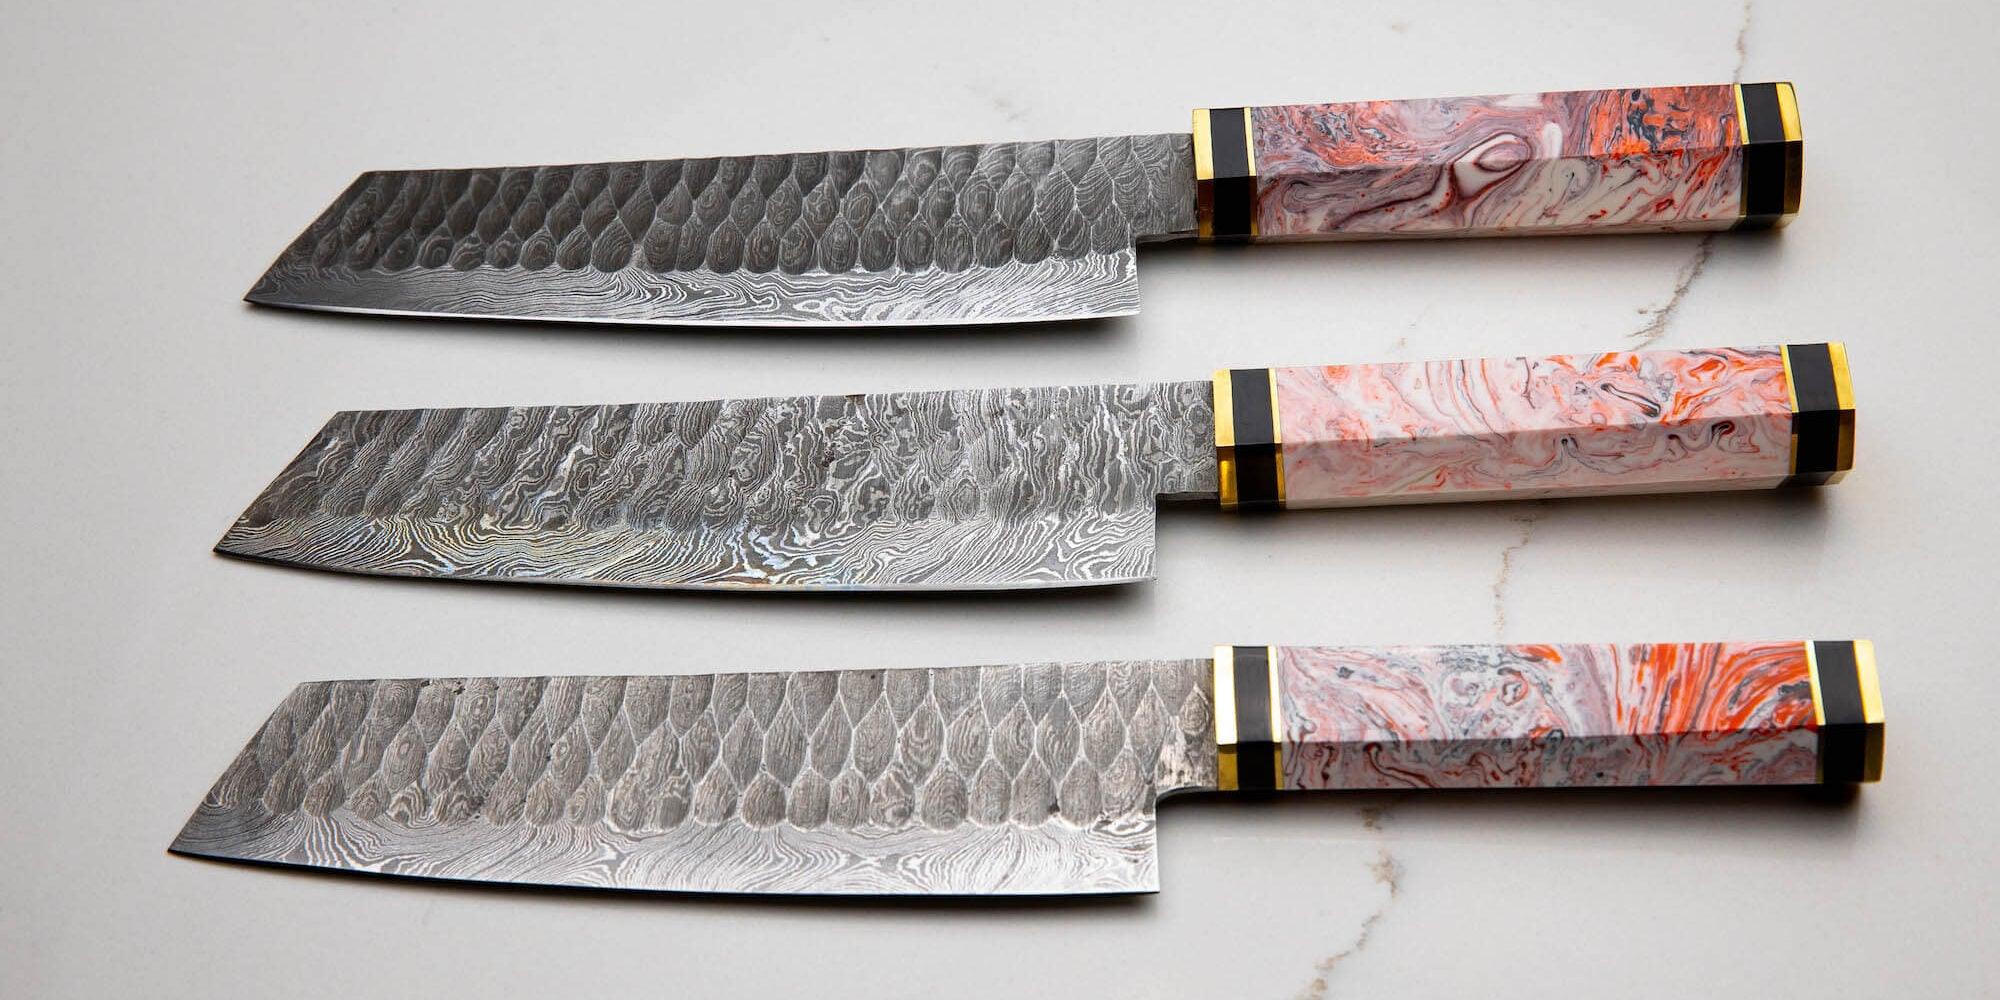 Damascus-Steel Special Chef's Knives